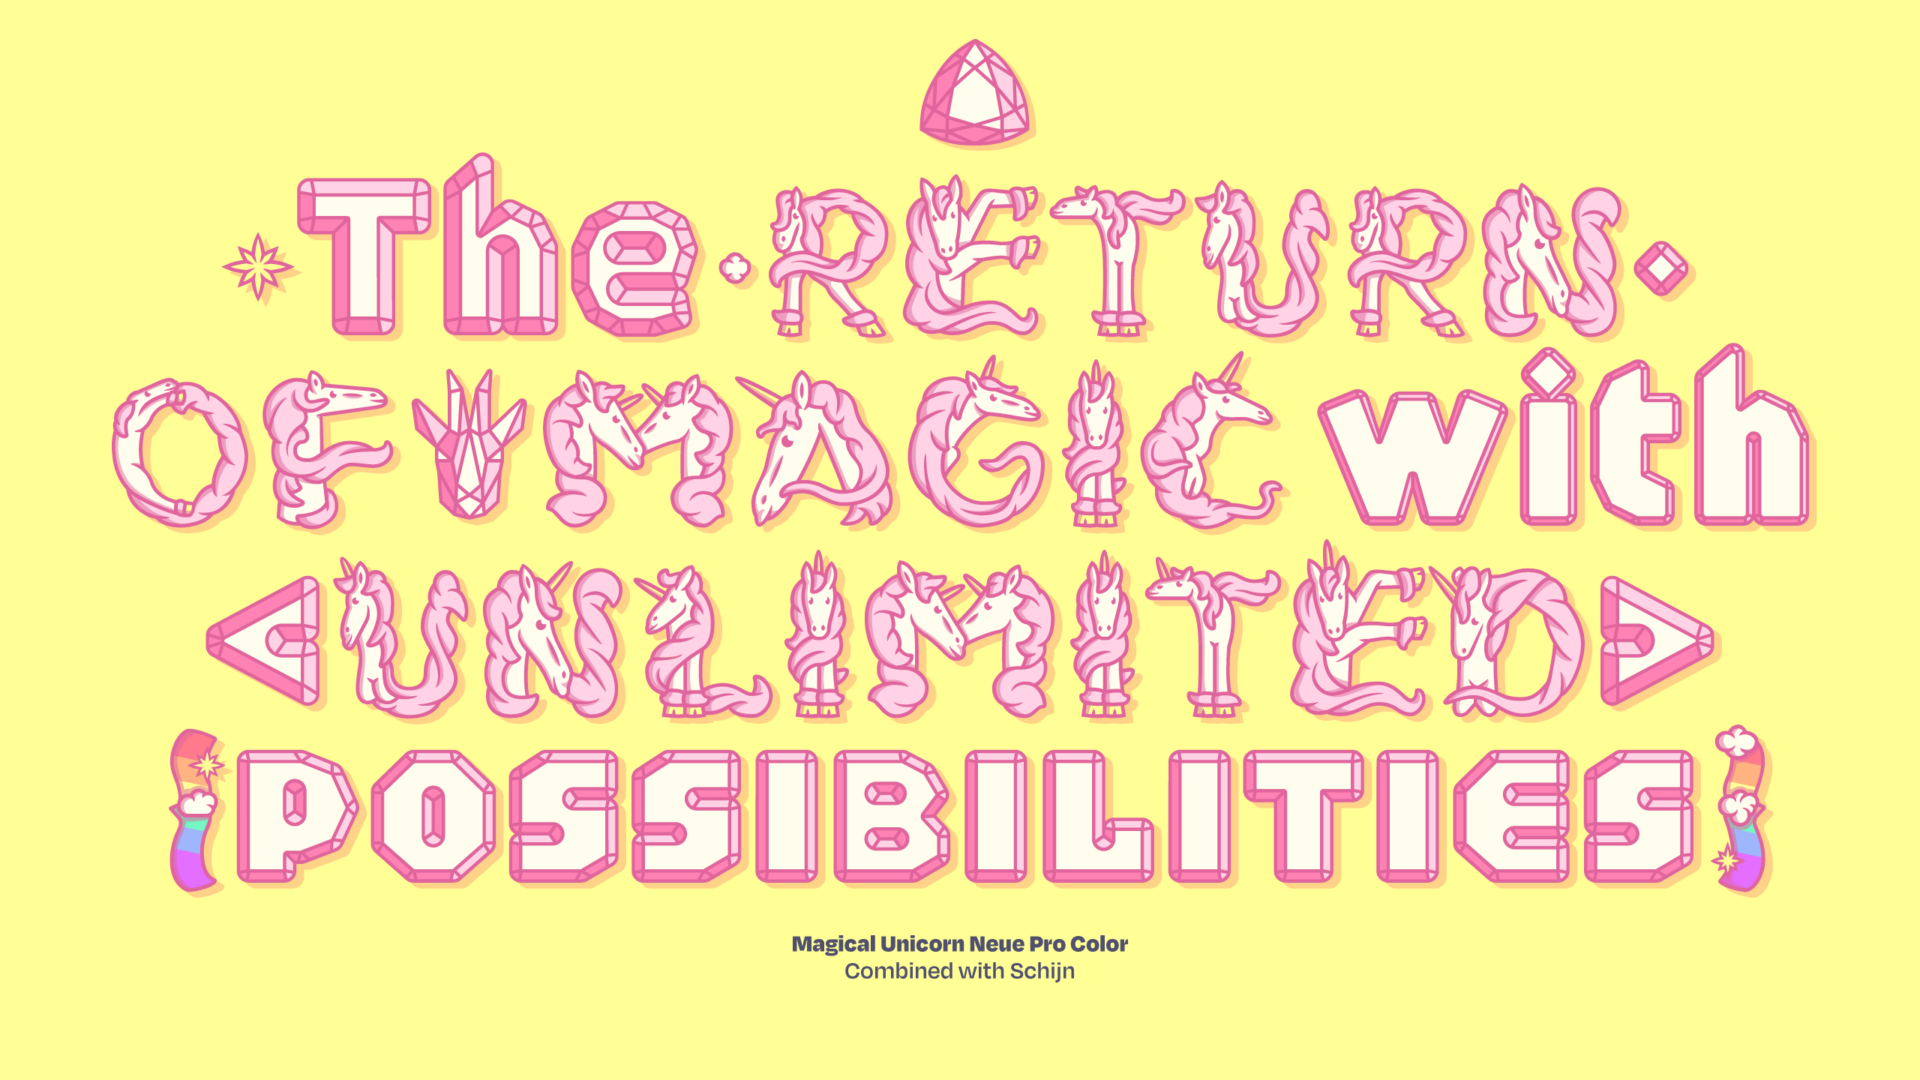 Text set in Magical Unicorn Pro